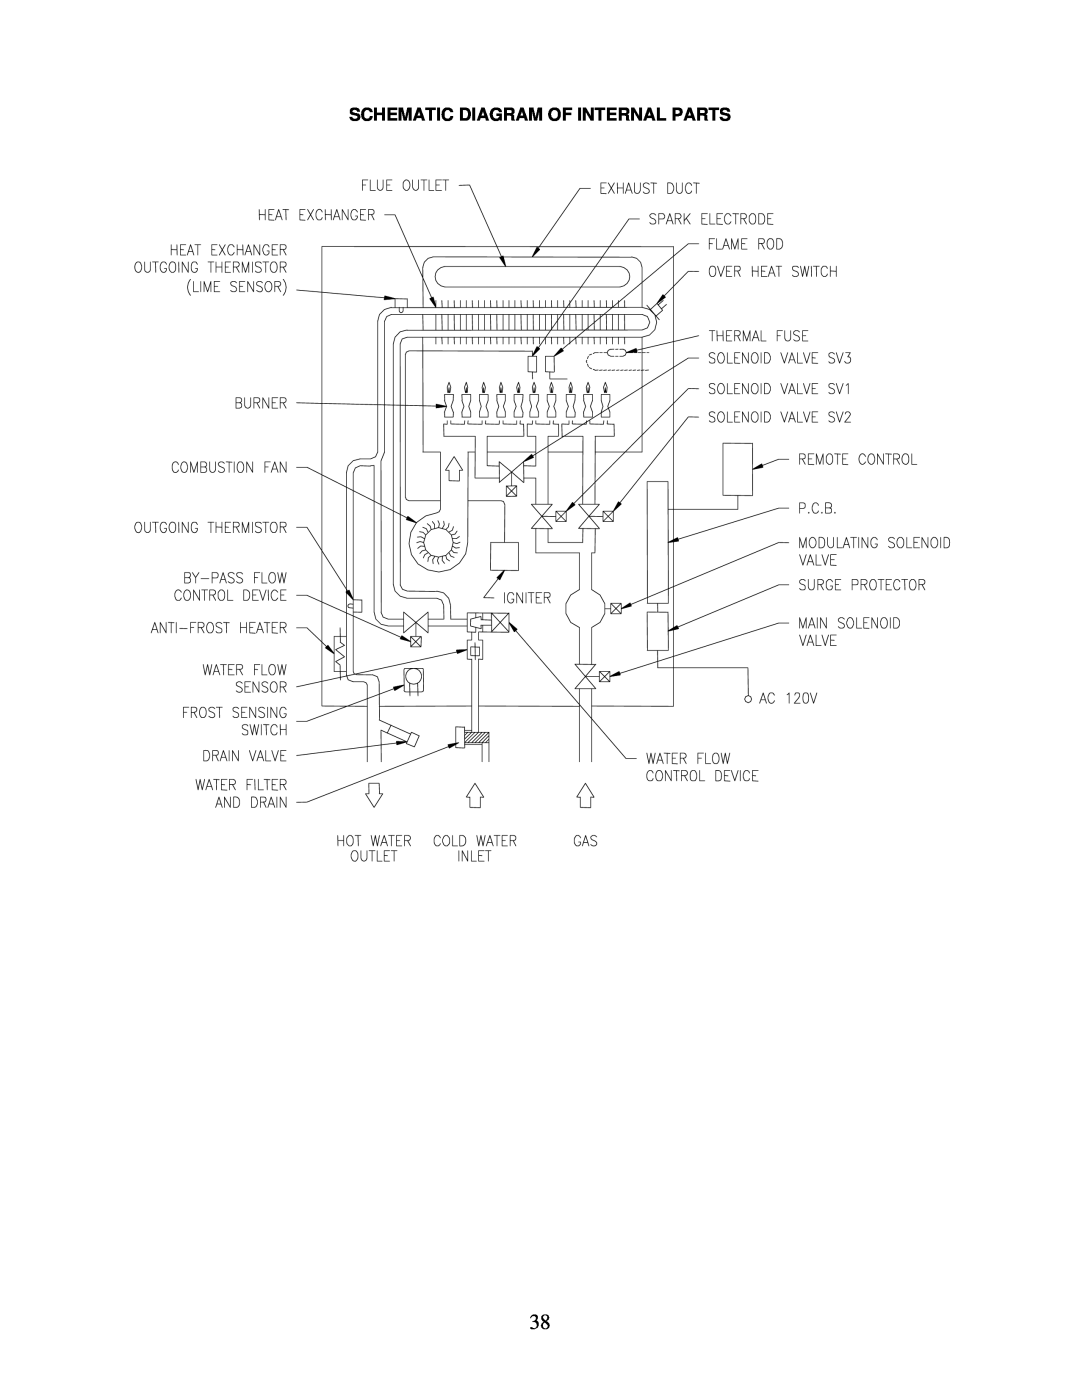 Bradford-White Corp IGE-199R Series, IGE-199C Series instruction manual Schematic Diagram Of Internal Parts 